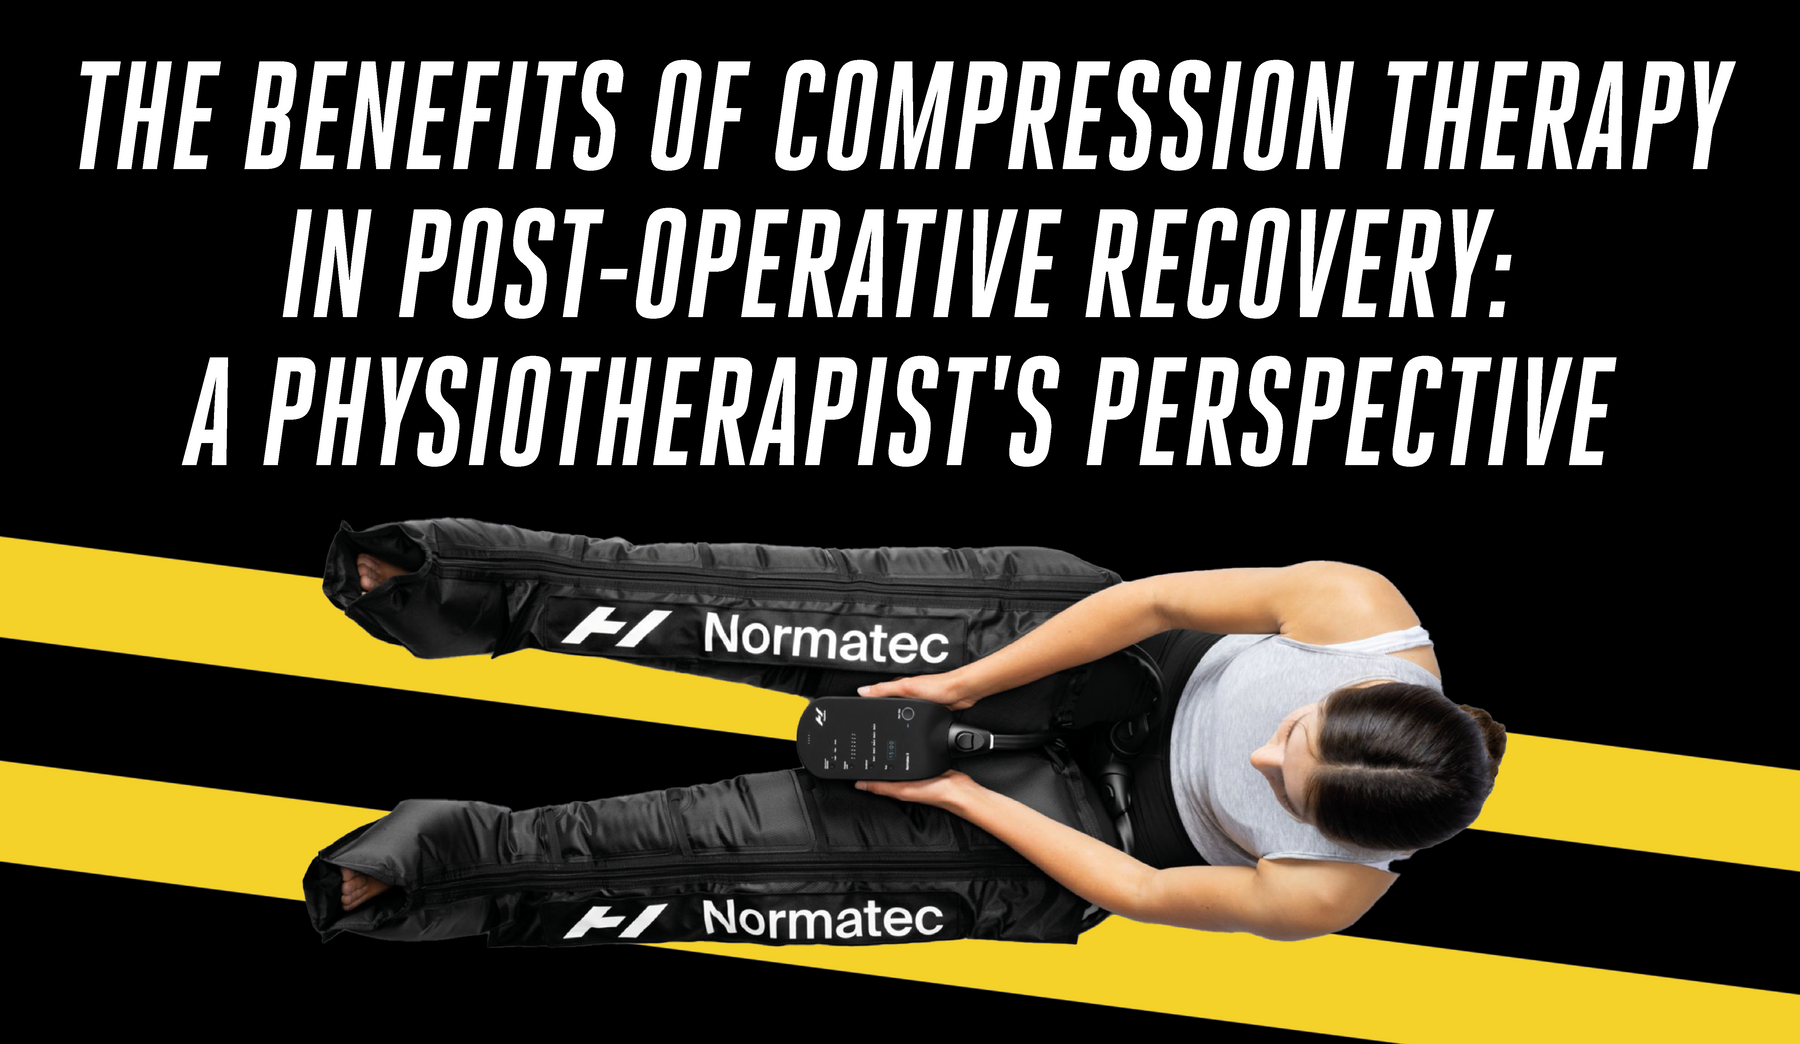 The Benefits of Compression Therapy in Post-Operative Recovery: A Physiotherapist's Perspective